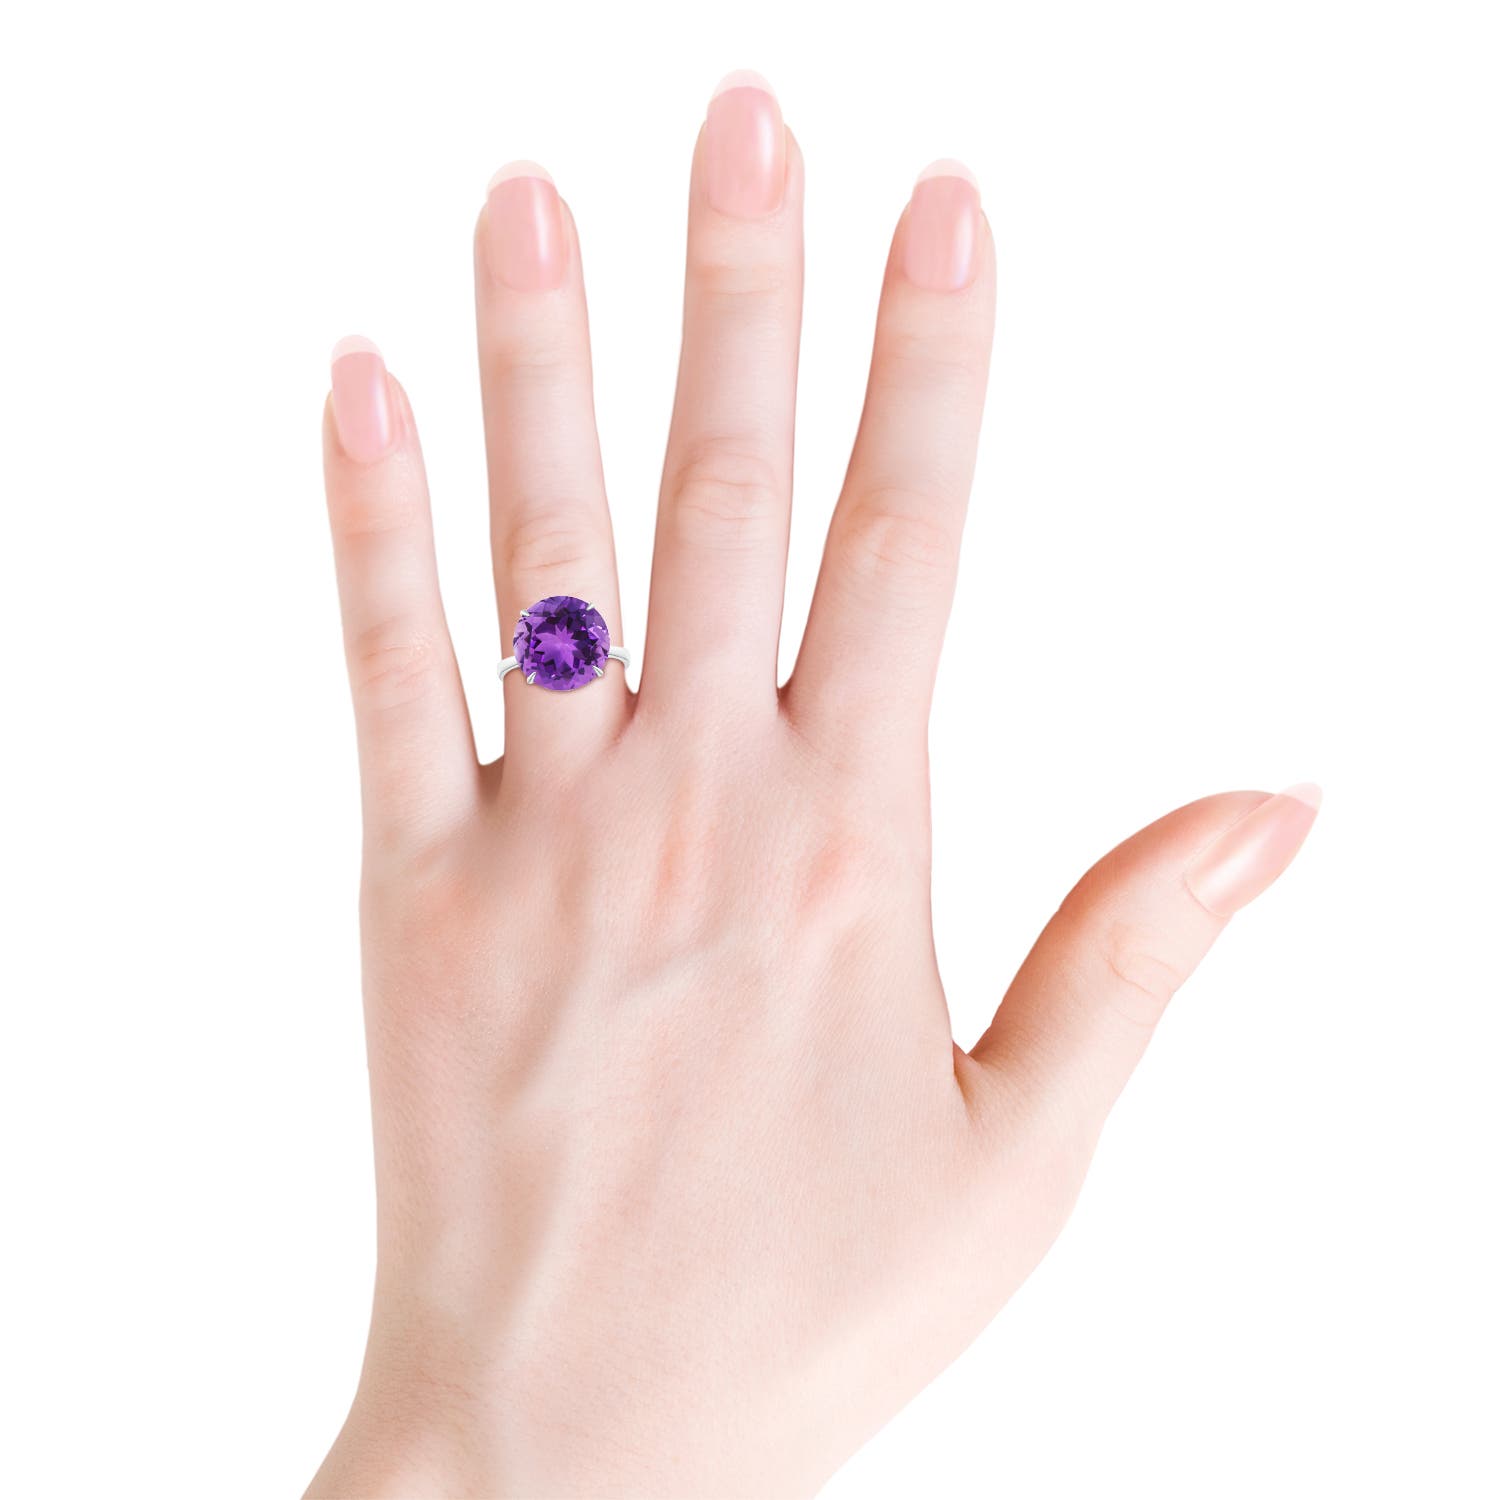 AAA- Amethyst / 7.2 CT / 14 KT White Gold